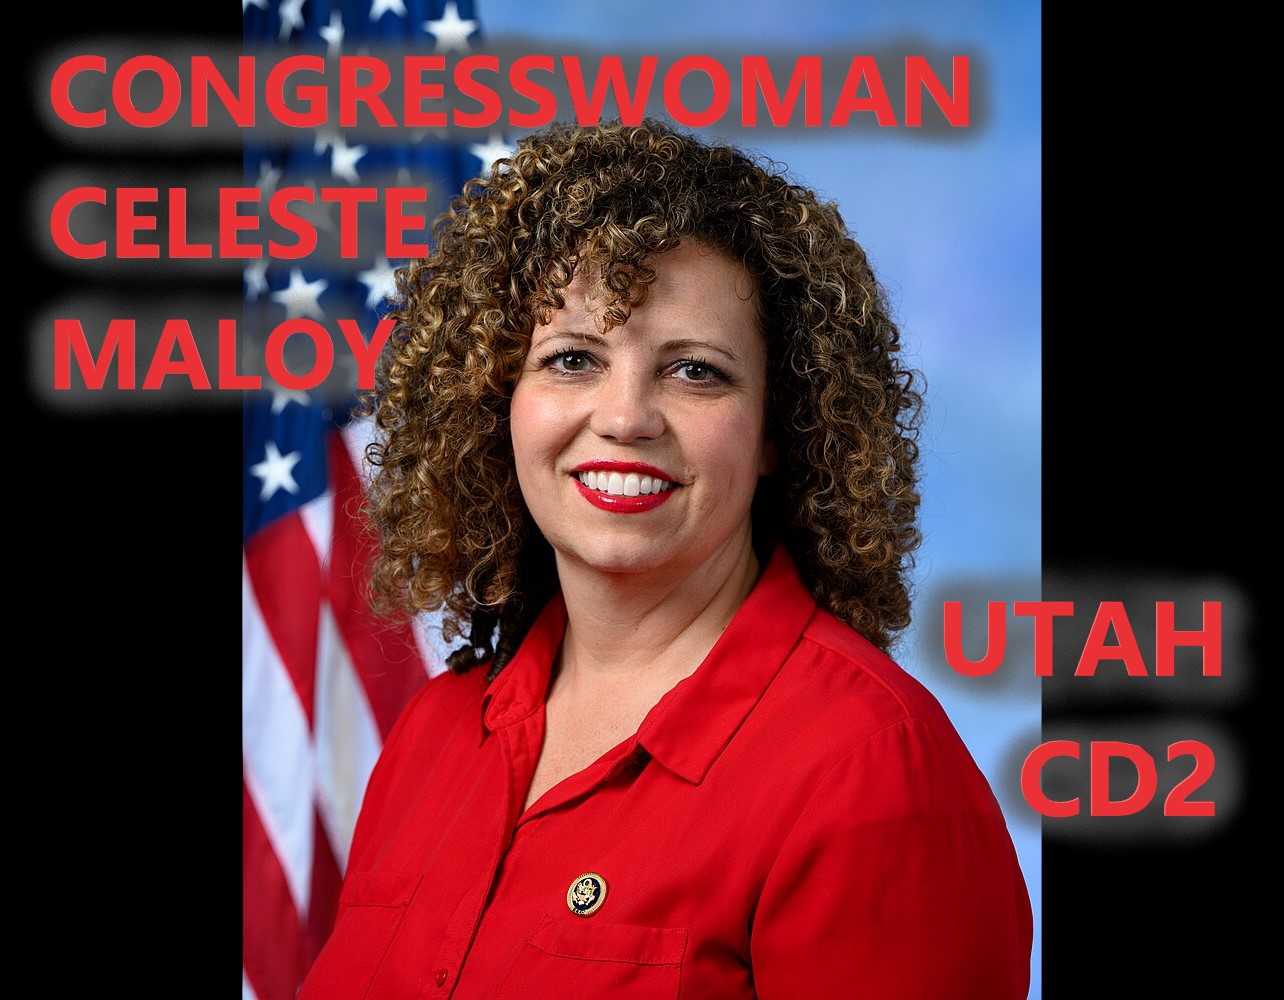 Check in with Congresswoman Celeste Maloy Utah CD2